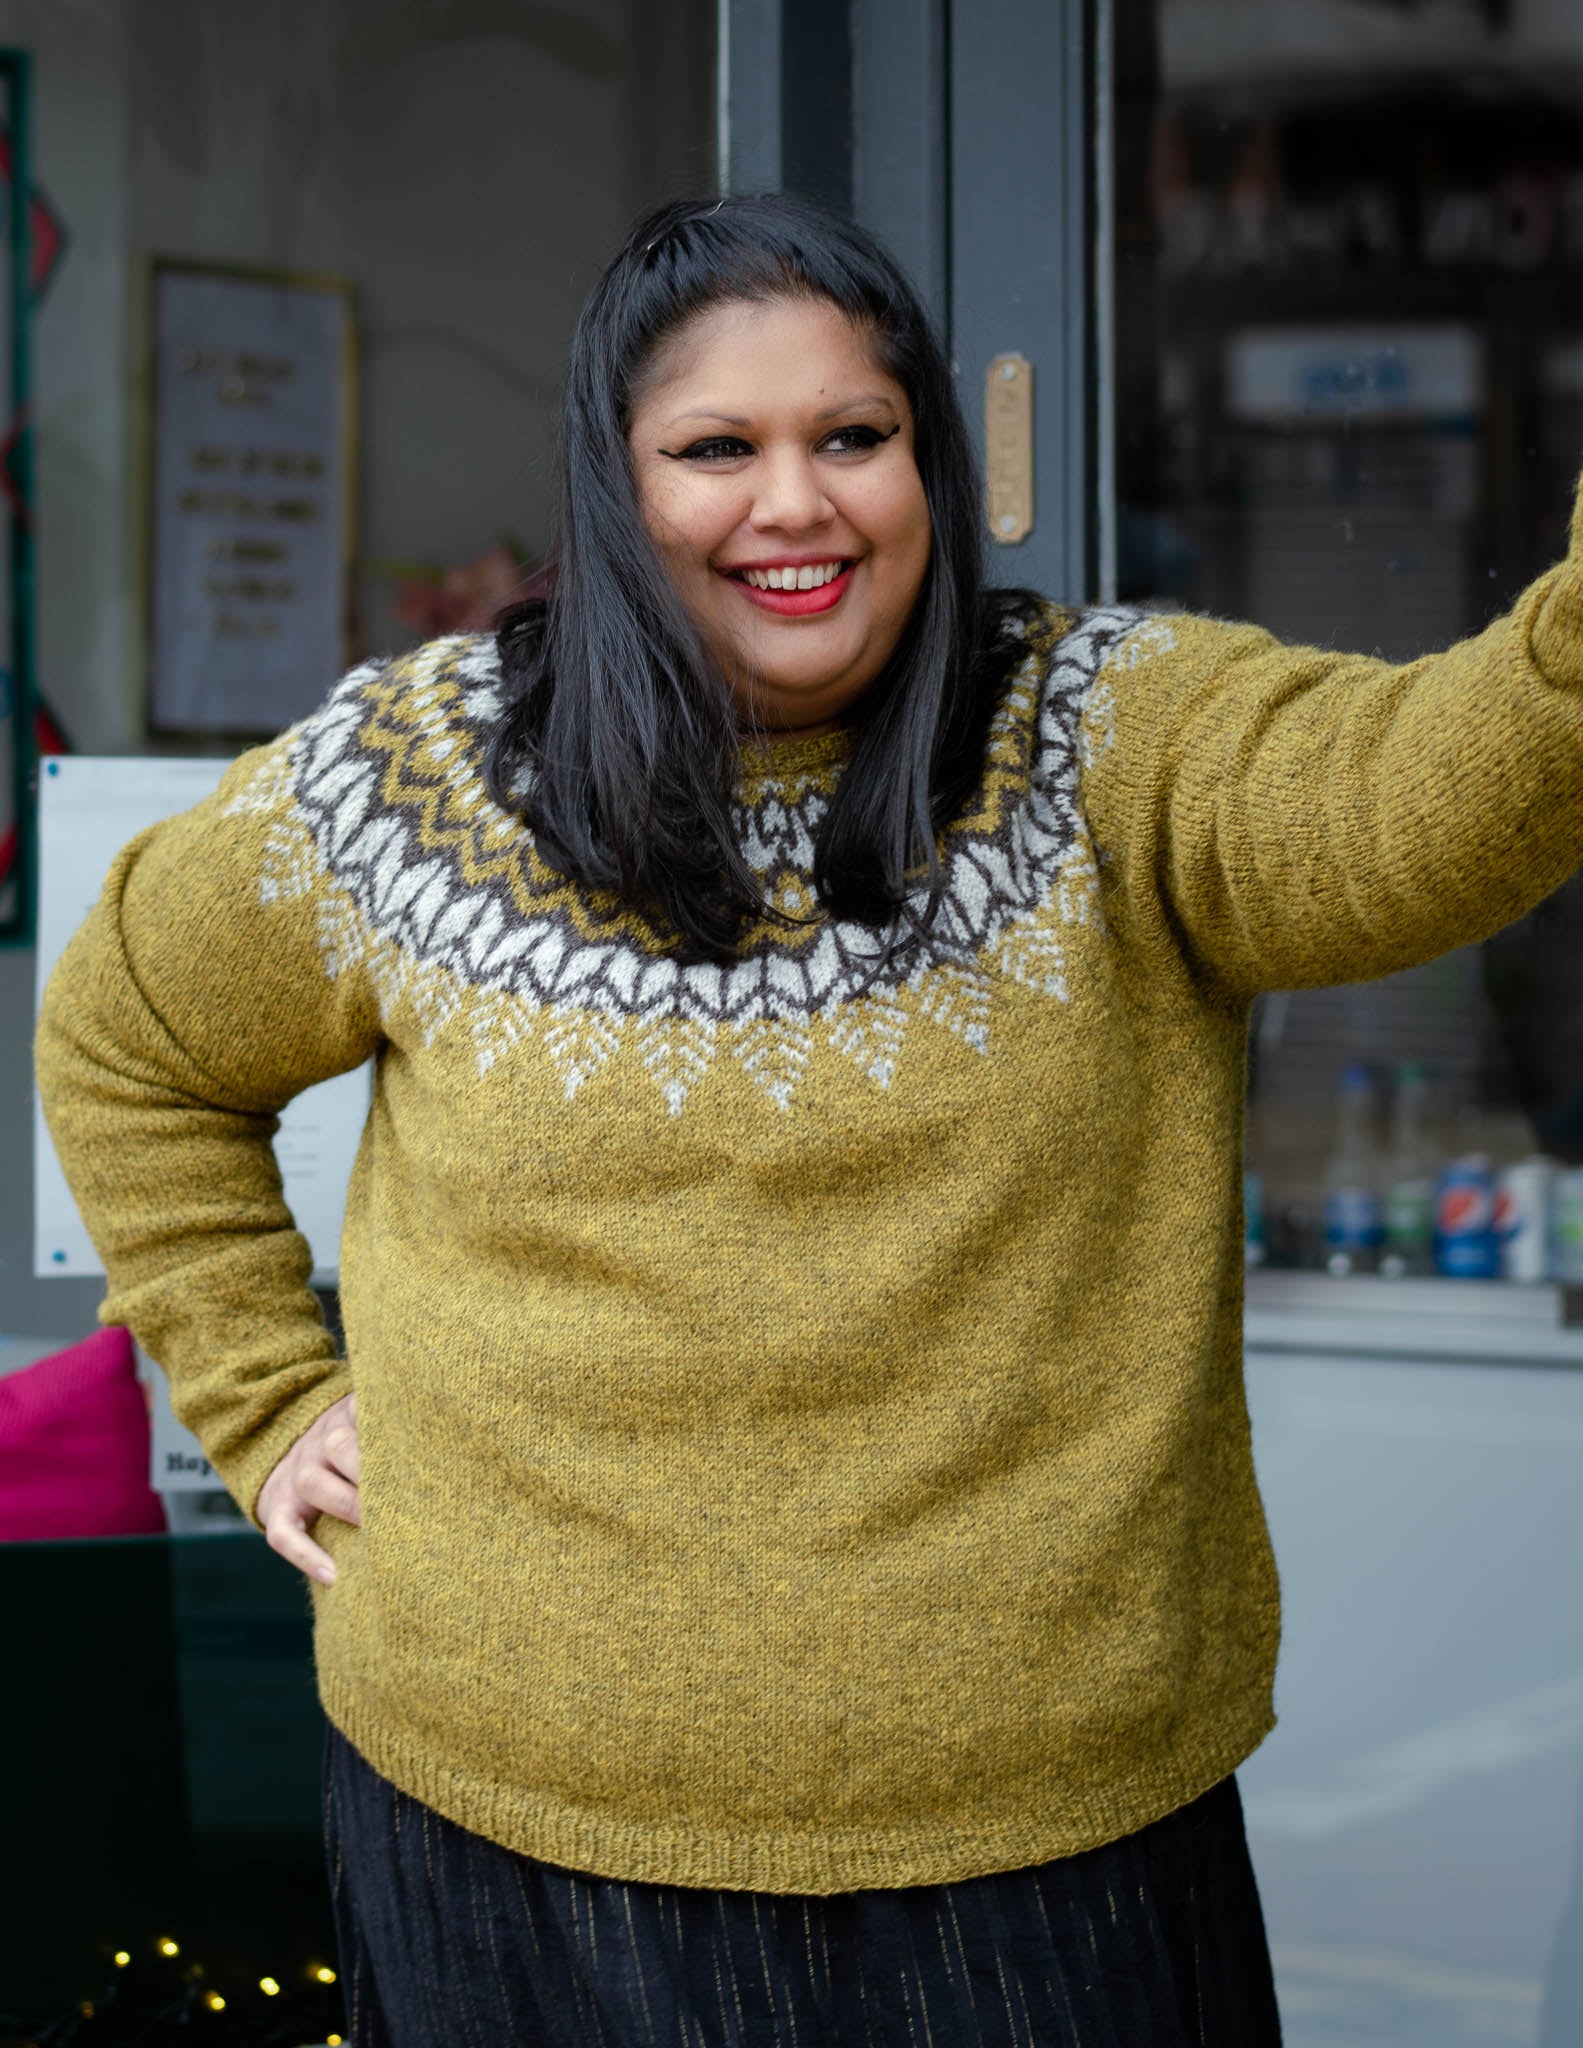 A south asian woman with mid length dark hair stands in a doorway looking towards the right of the frame. She is wearing  an earthy green knit sweater with a dark brown and light grey colourwork yoke.